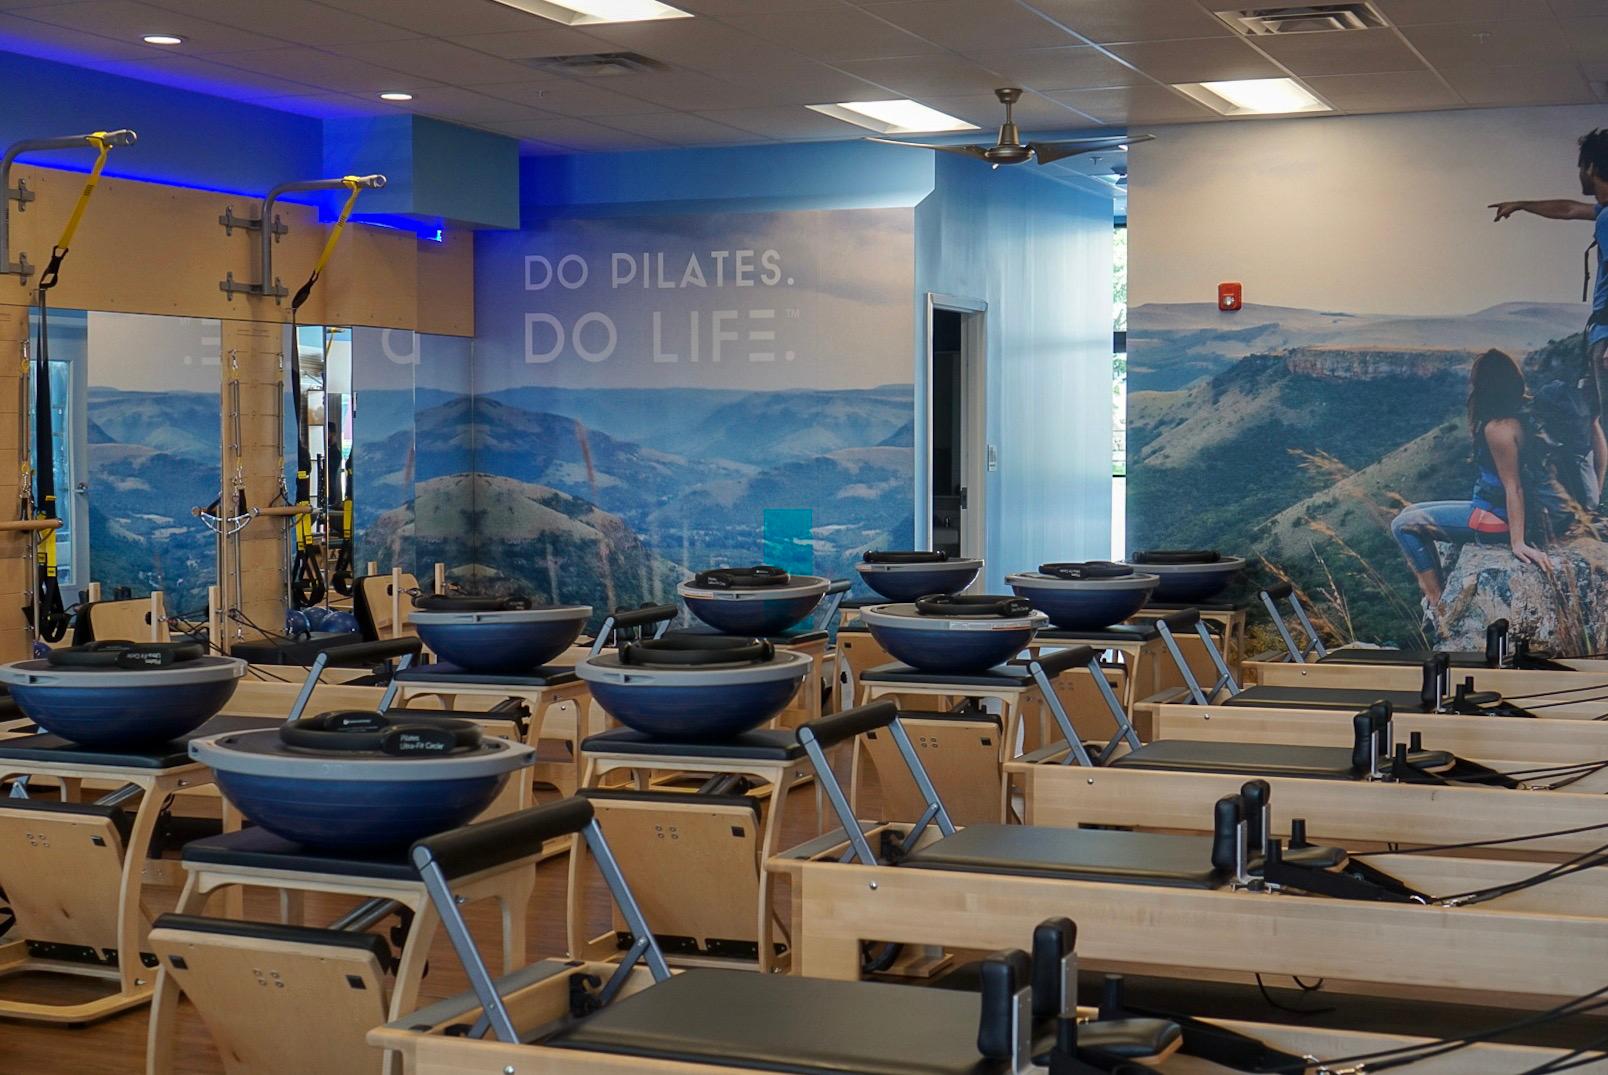 Club Pilates, 15 Clifton Country Rd, Clifton Park, NY - MapQuest